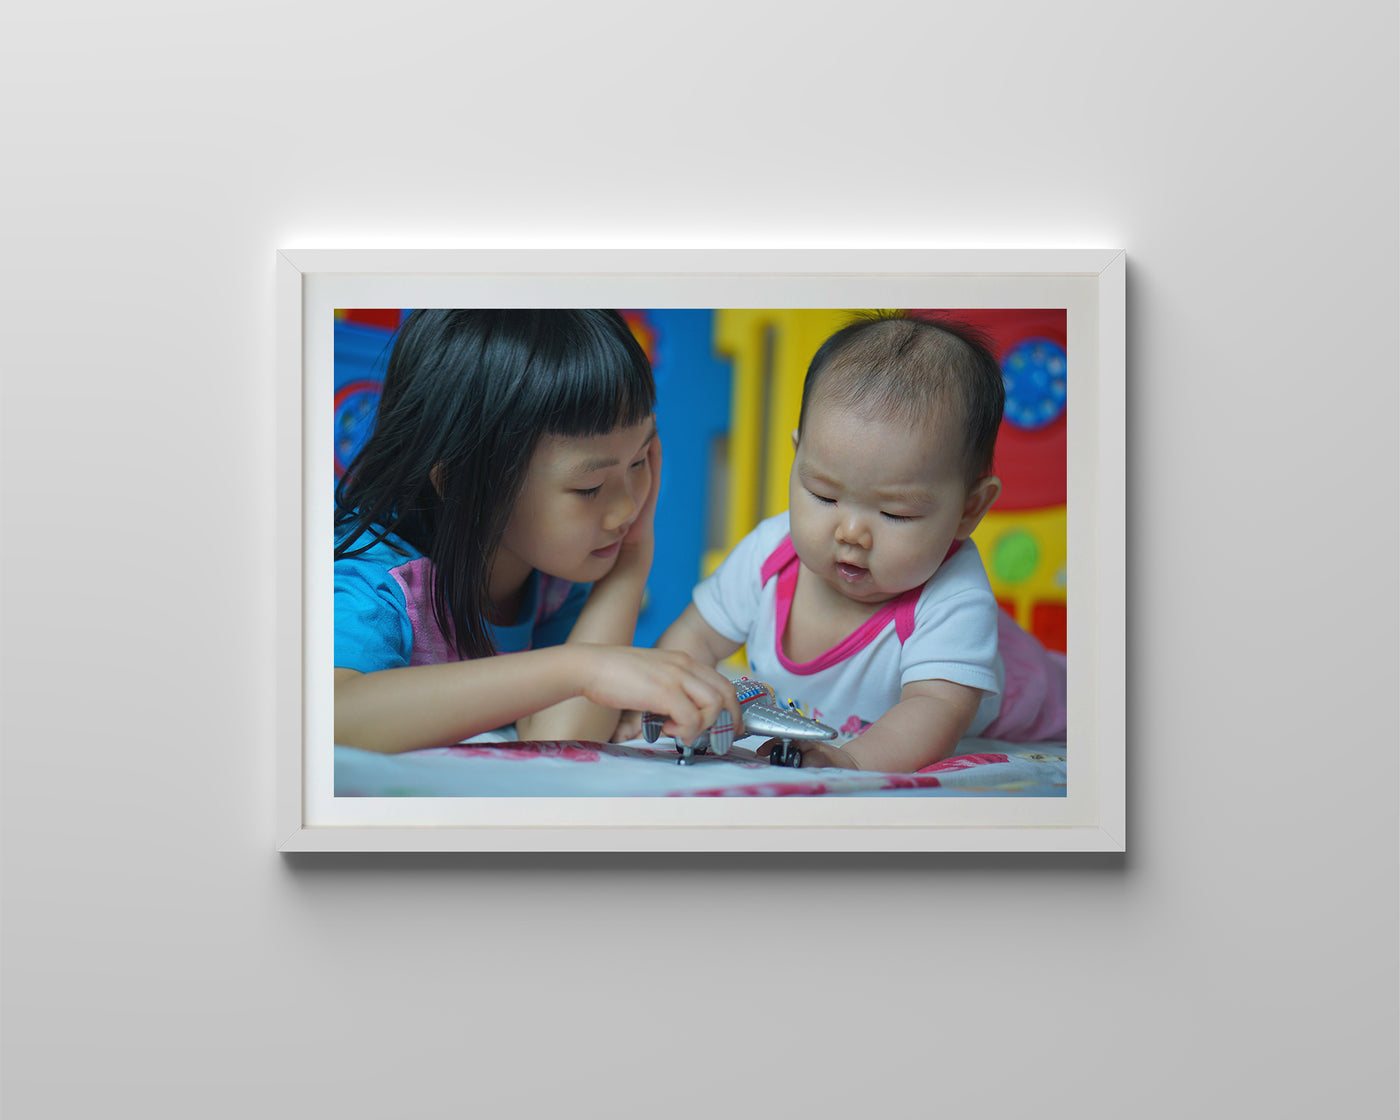 Playing Aeroplane With Sibling (Framed Prints)